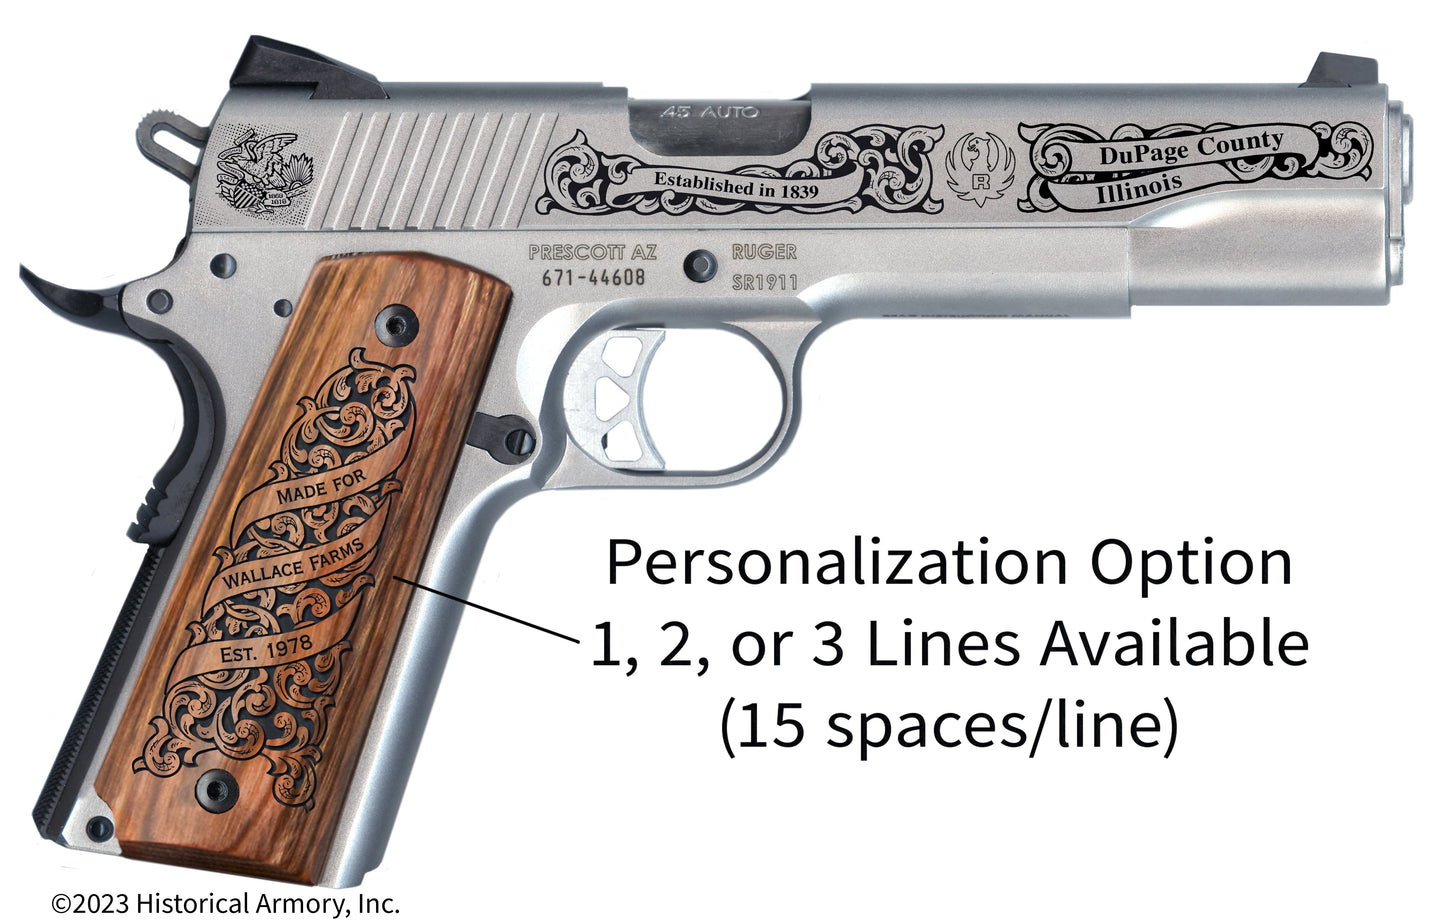 DuPage County Illinois Personalized Engraved .45 Auto Ruger 1911